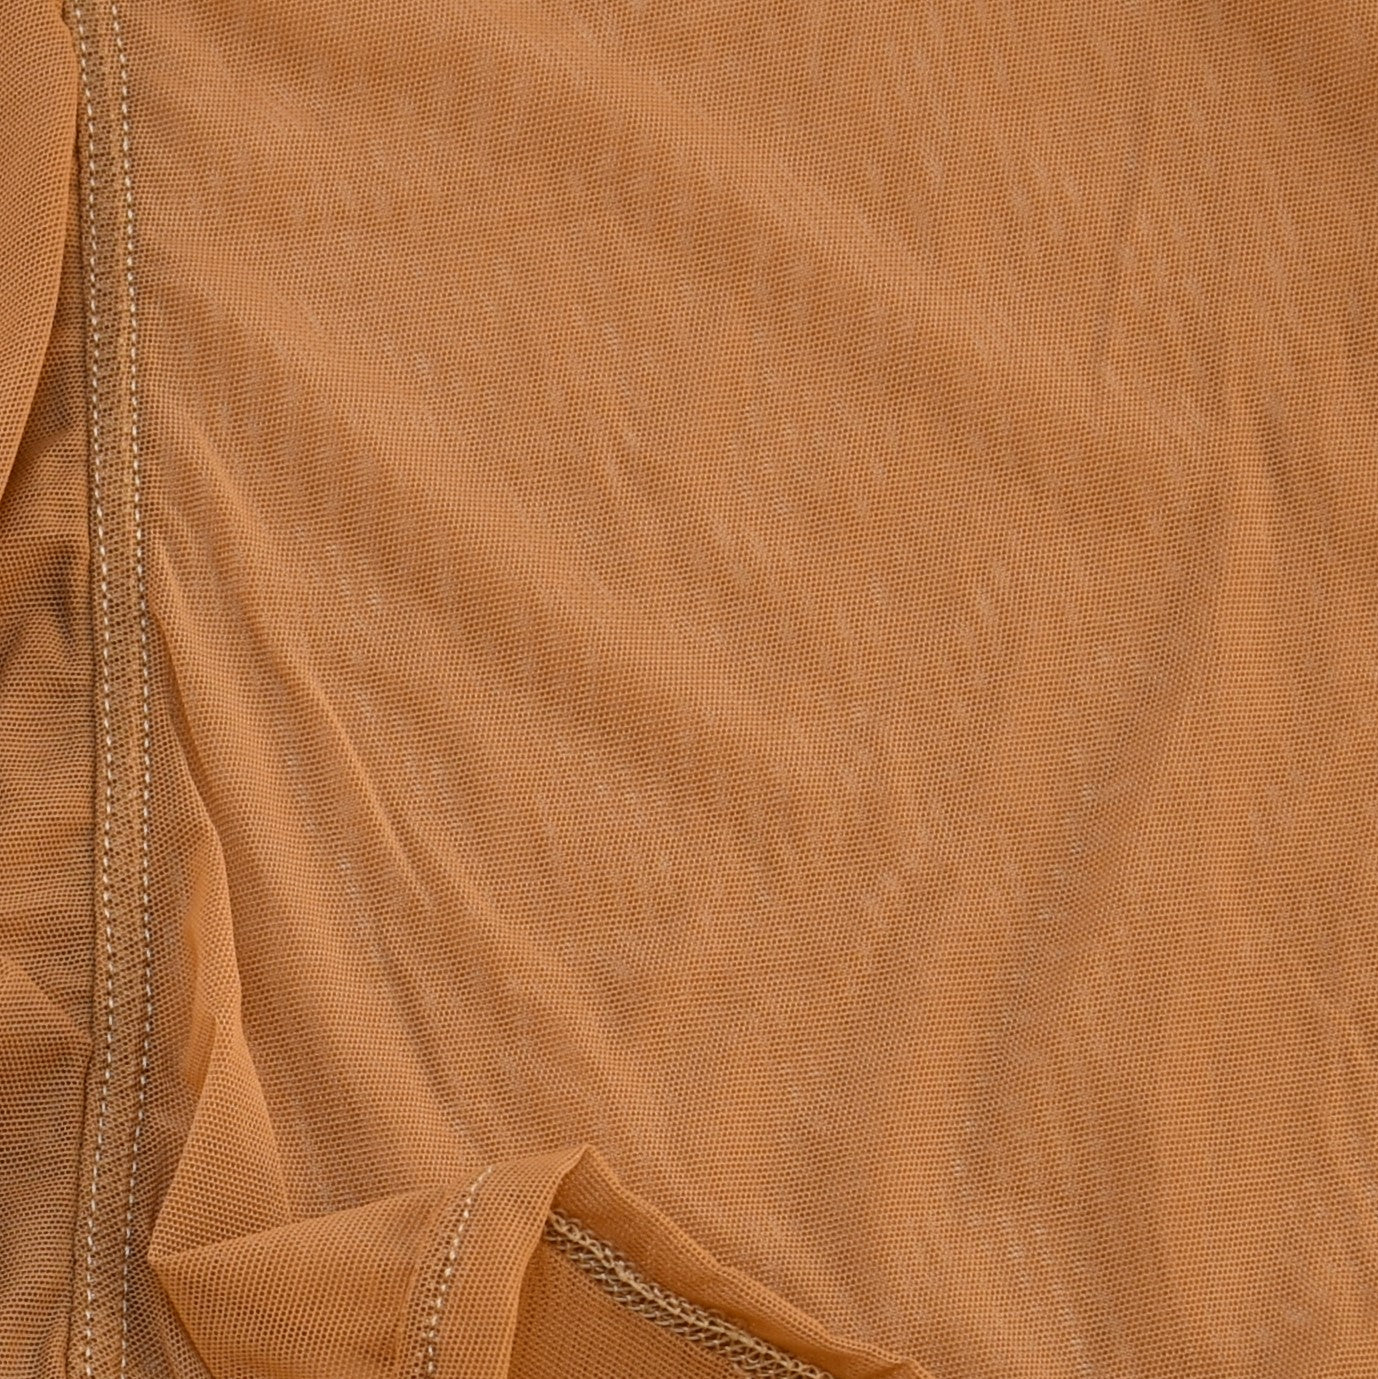 See Through Men's Trunks by Etseo Skin fabric detail